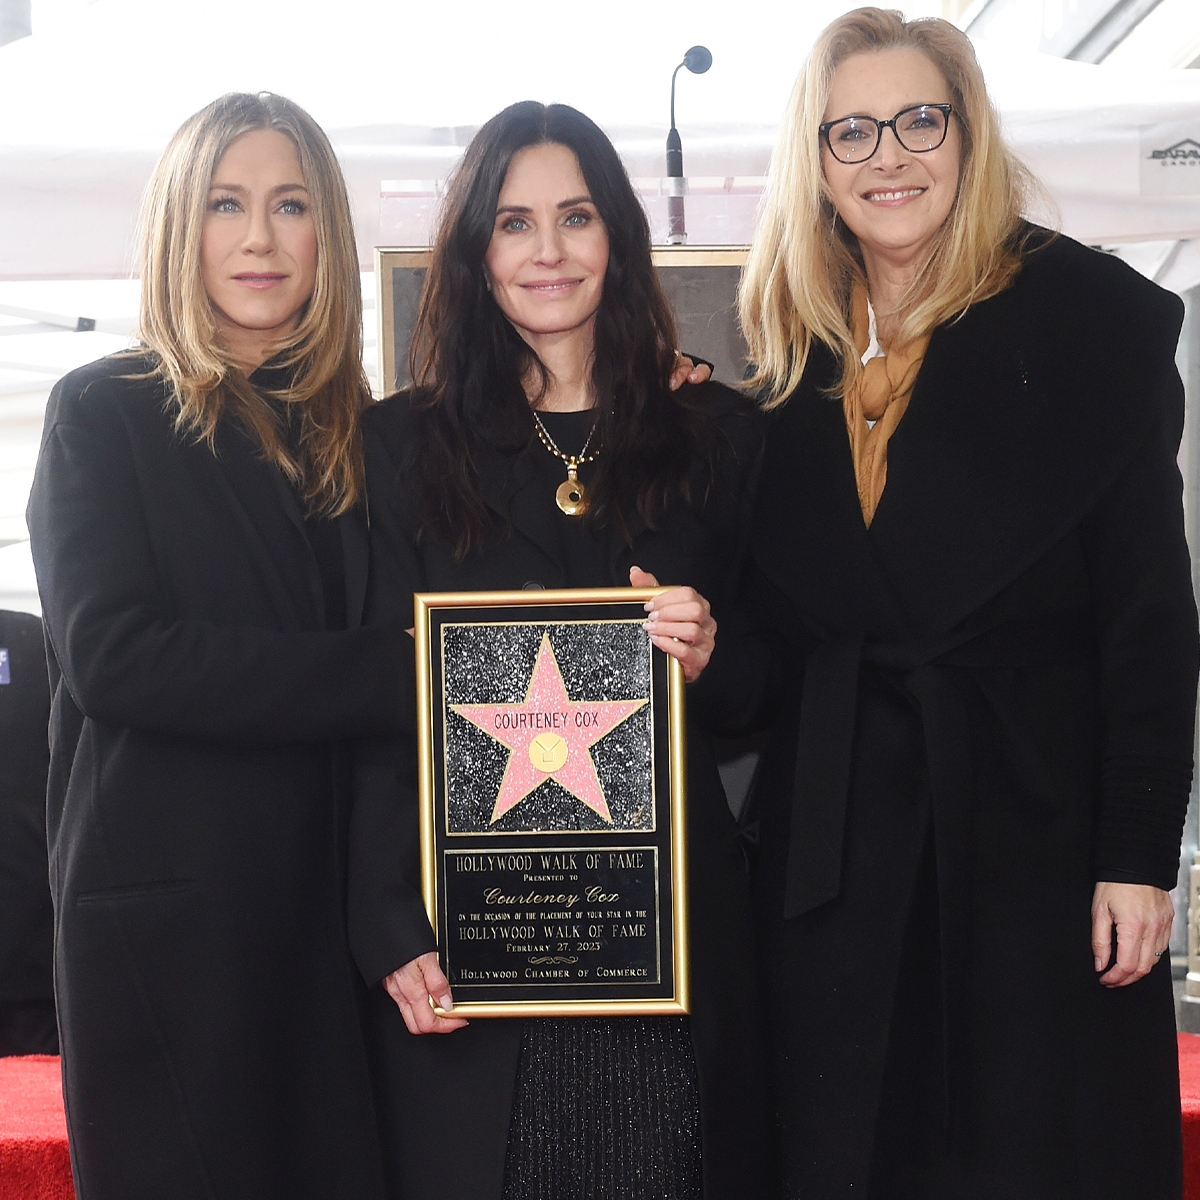 Friends Reunion Proves Courteney Cox, Jennifer Aniston and Lisa Kudrow Are Each Other’s Lobsters – E! Online